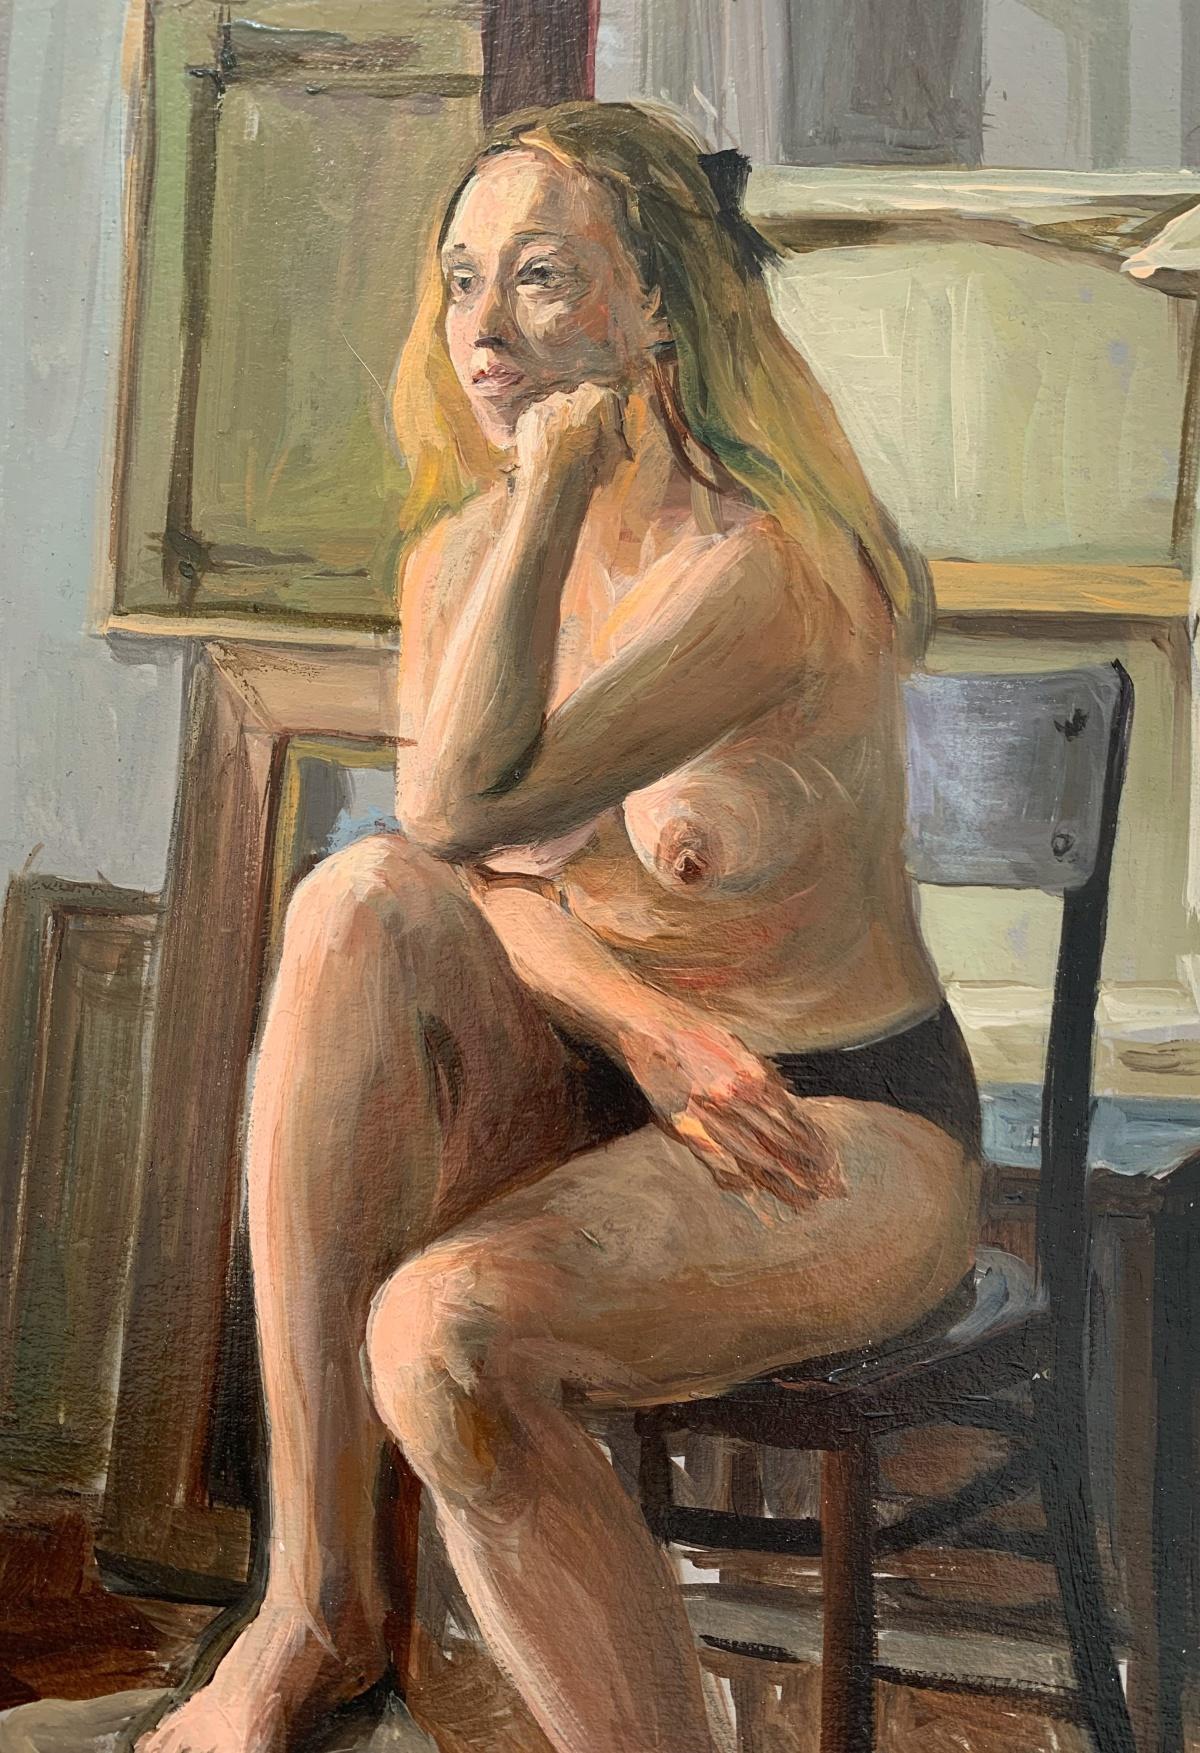 A sitter - Realistic oil painting, Female nude, Warm tones, Young Polish artist - Naturalistic Painting by Agnieszka Staak-Janczarska